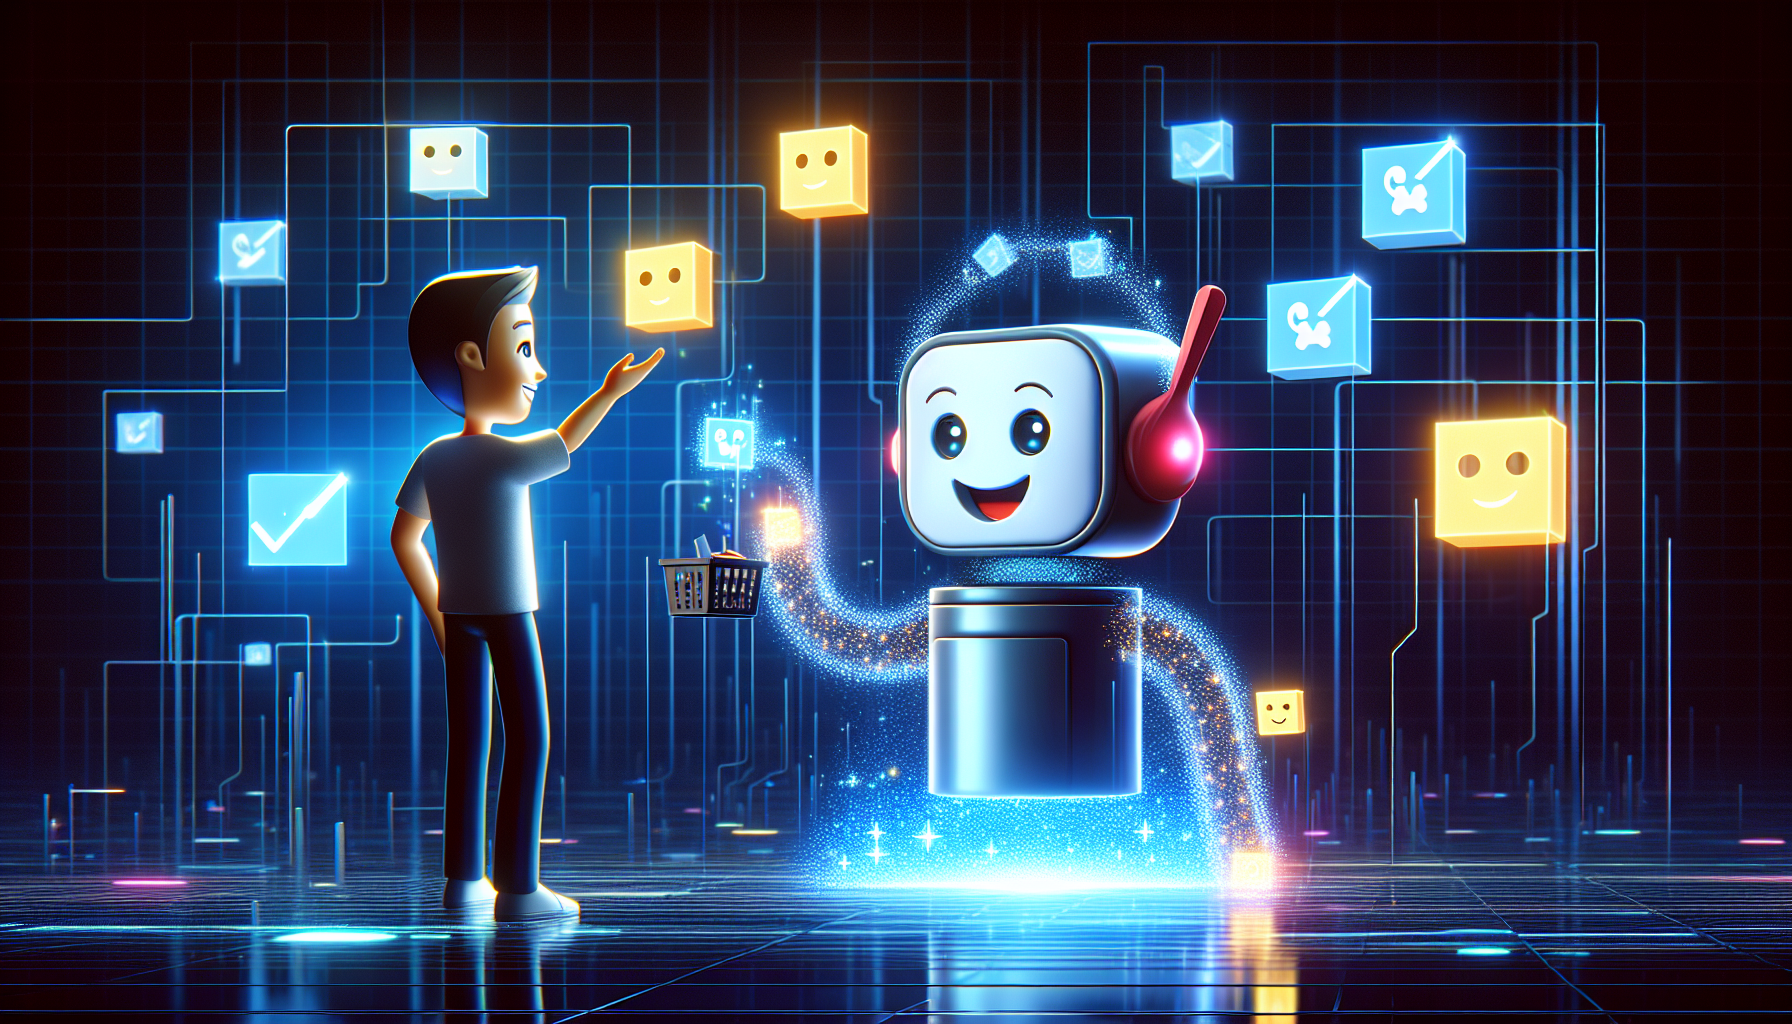 Illustration of user engaging with personalized AI character